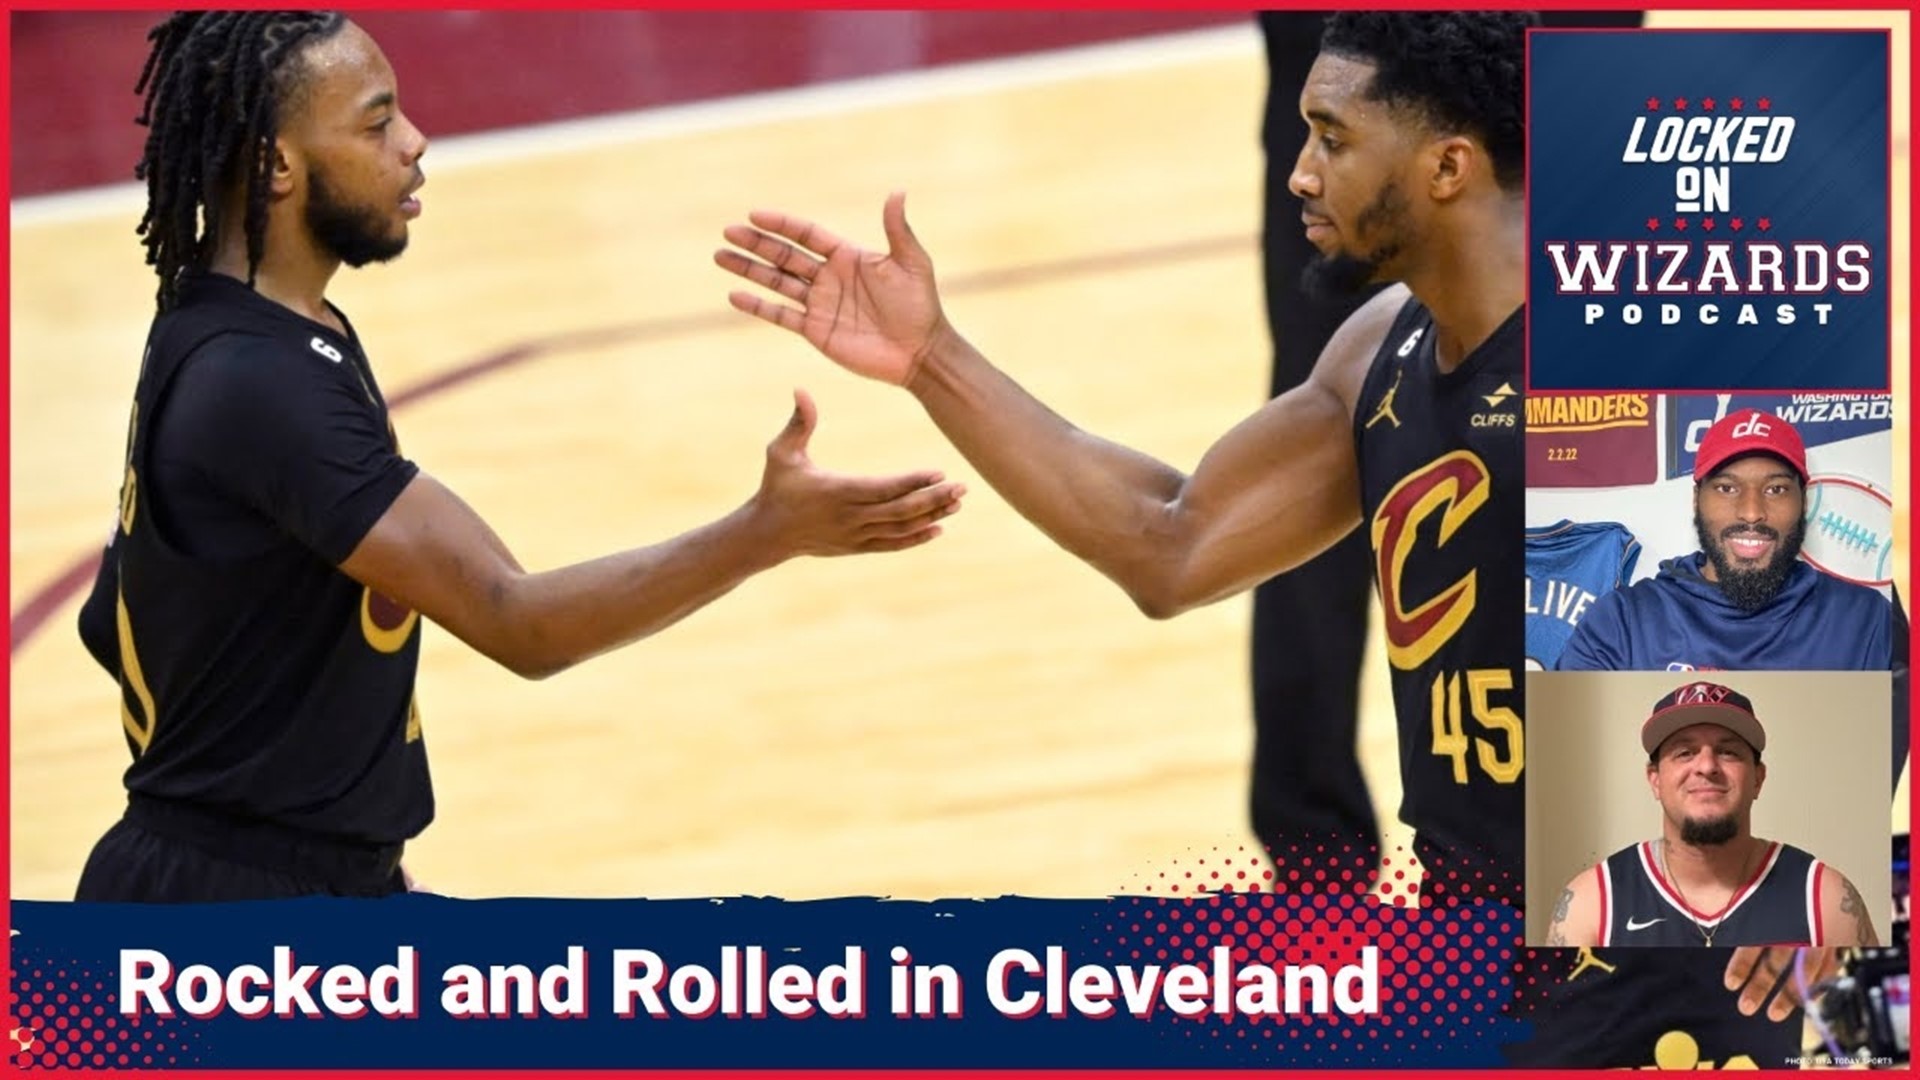 Brandon recaps the Wizard's loss vs. the Cavs. Beal and KP score 20+ and Kispert adds 12. He discusses their problems on defense and whether they are fixable.